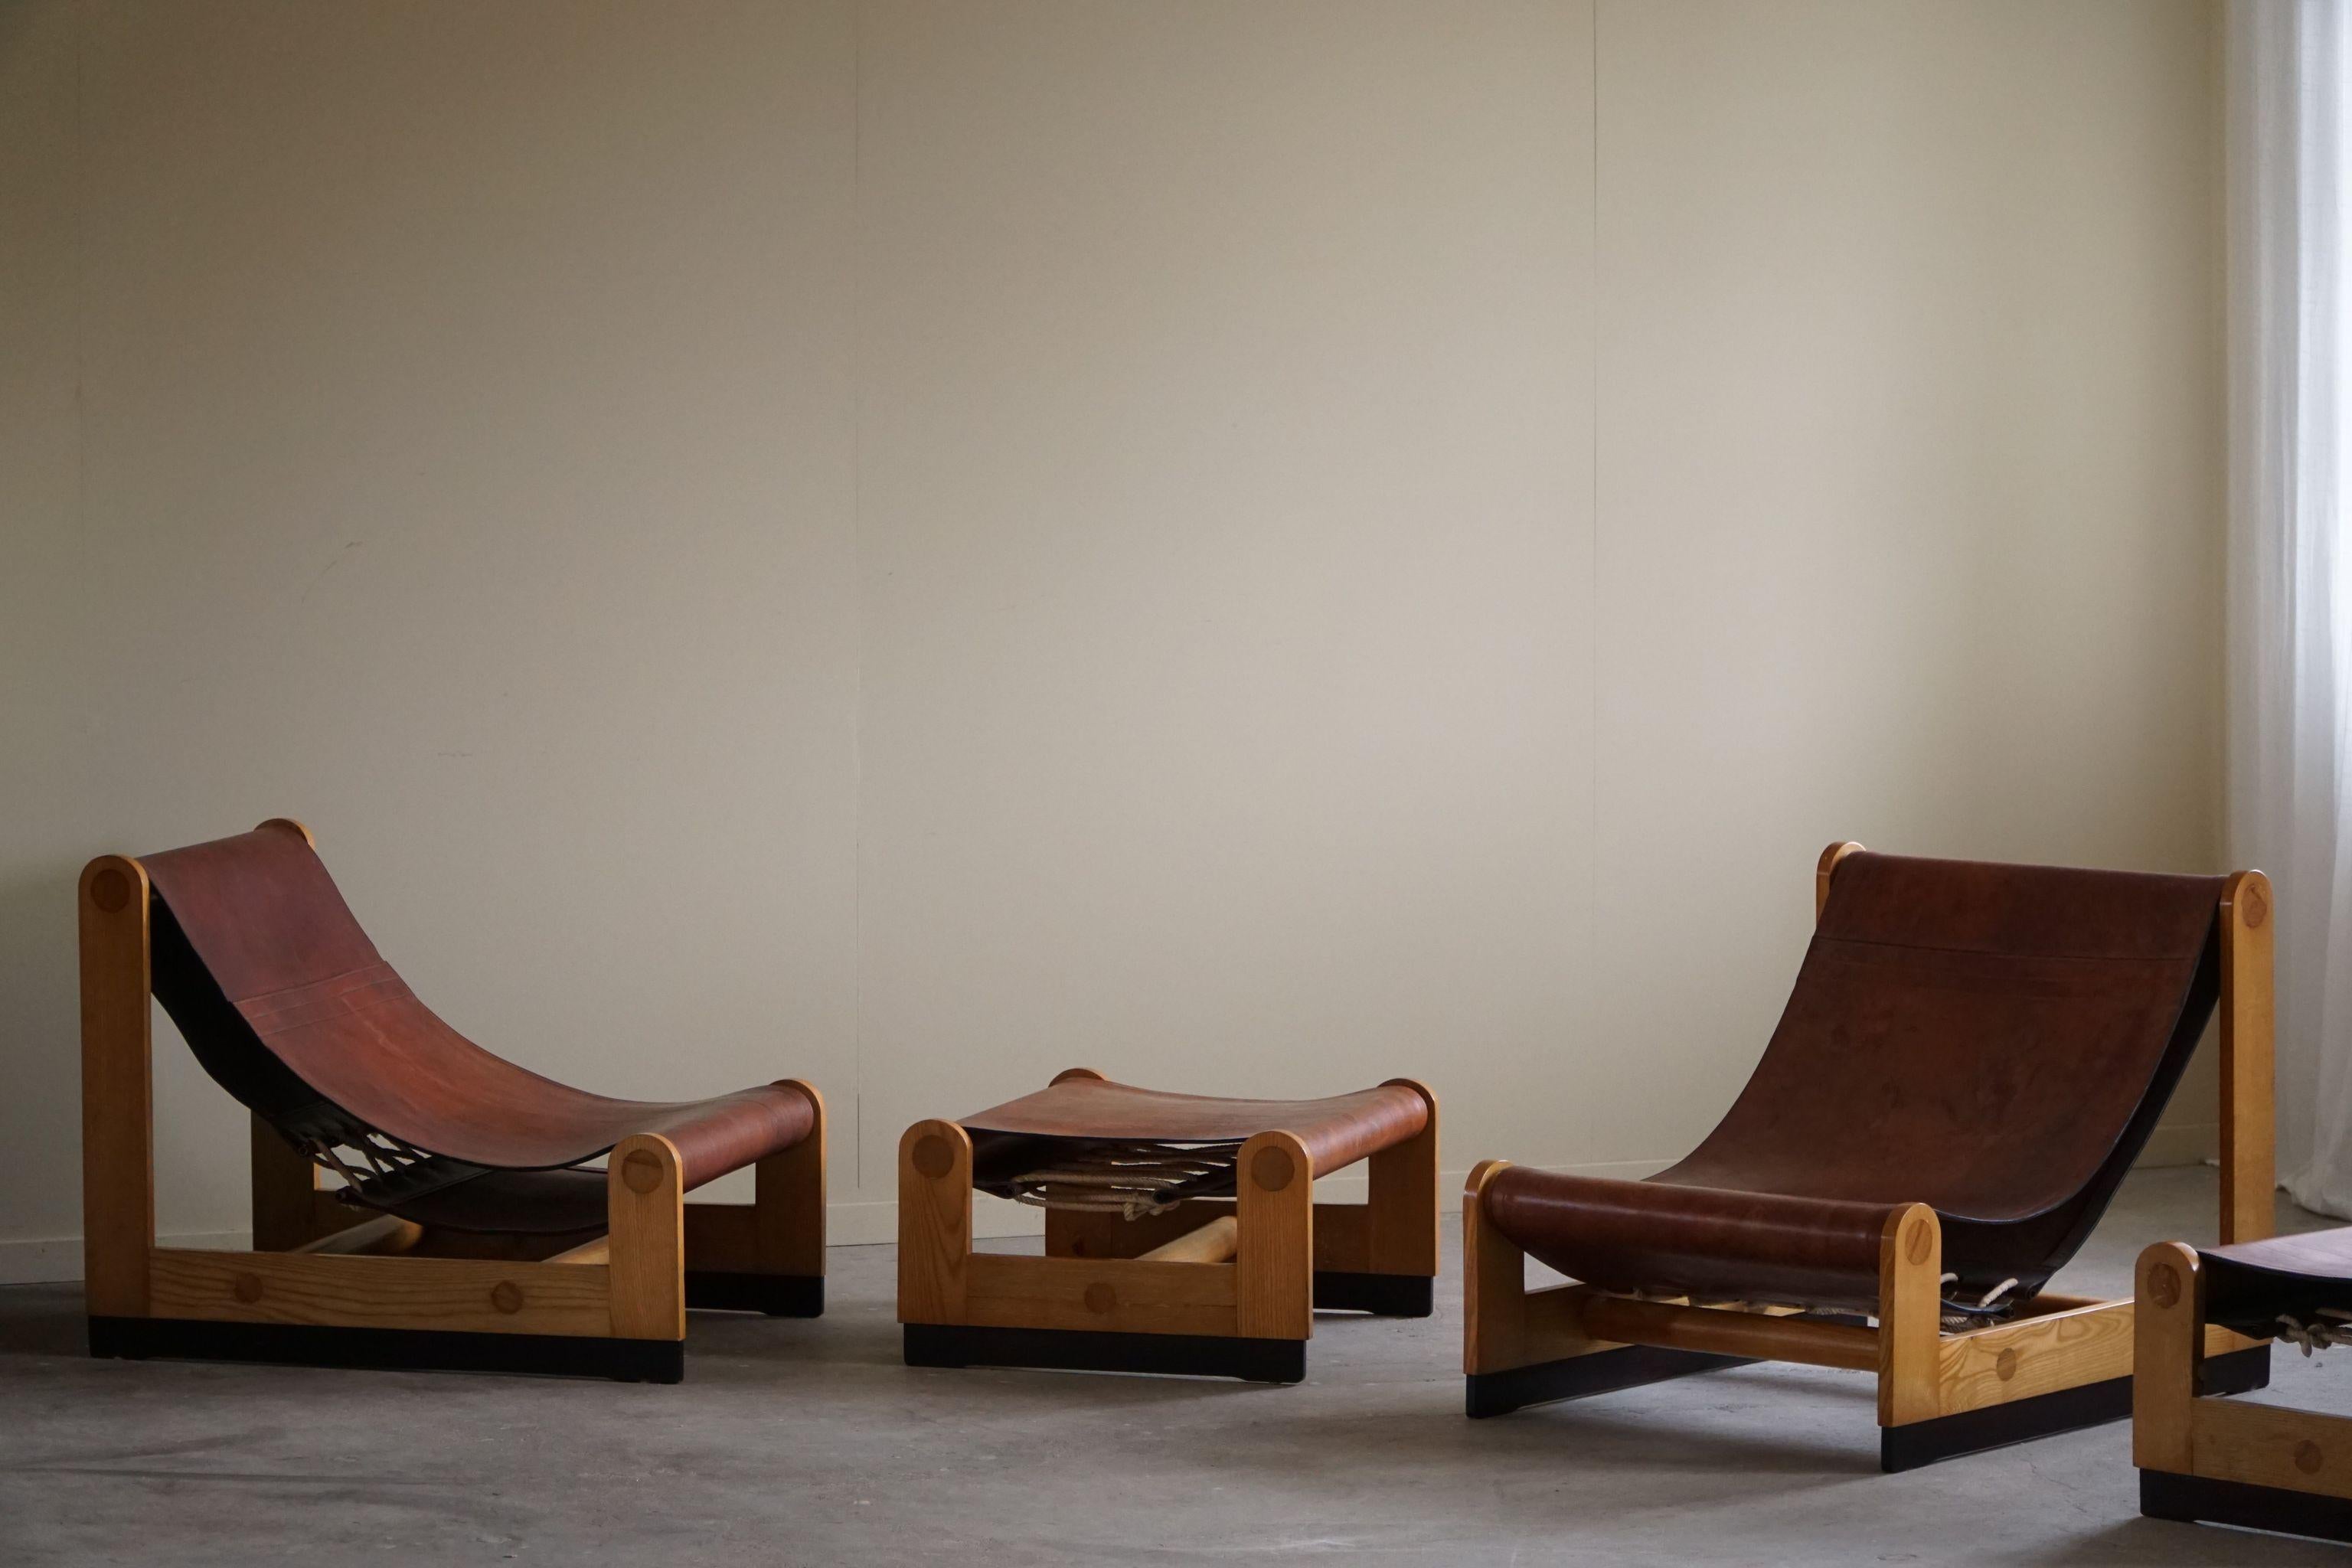 20th Century Francesco Lucianetti, Lounge Chairs in Leather & Elm, Italian Modern, 1960s For Sale